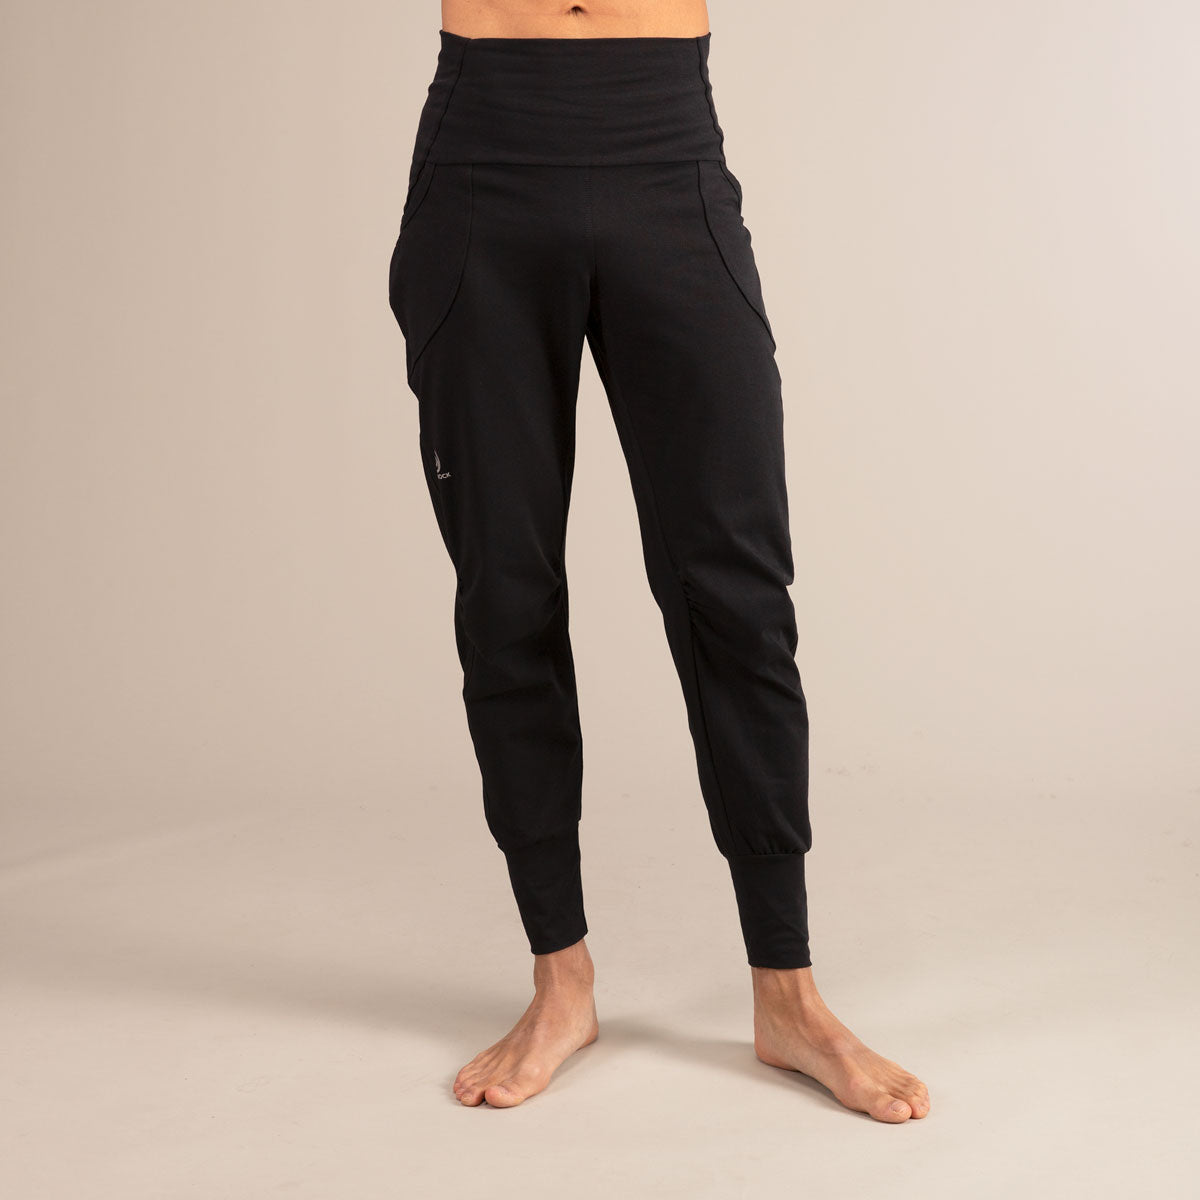 BATABOOM Sweatpants | Super Soft Organic Sweats | 3RD ROCK Clothing -  Donald is 6ft 1 with a 29" waist, 36" hips and wears a 30/LL.  M